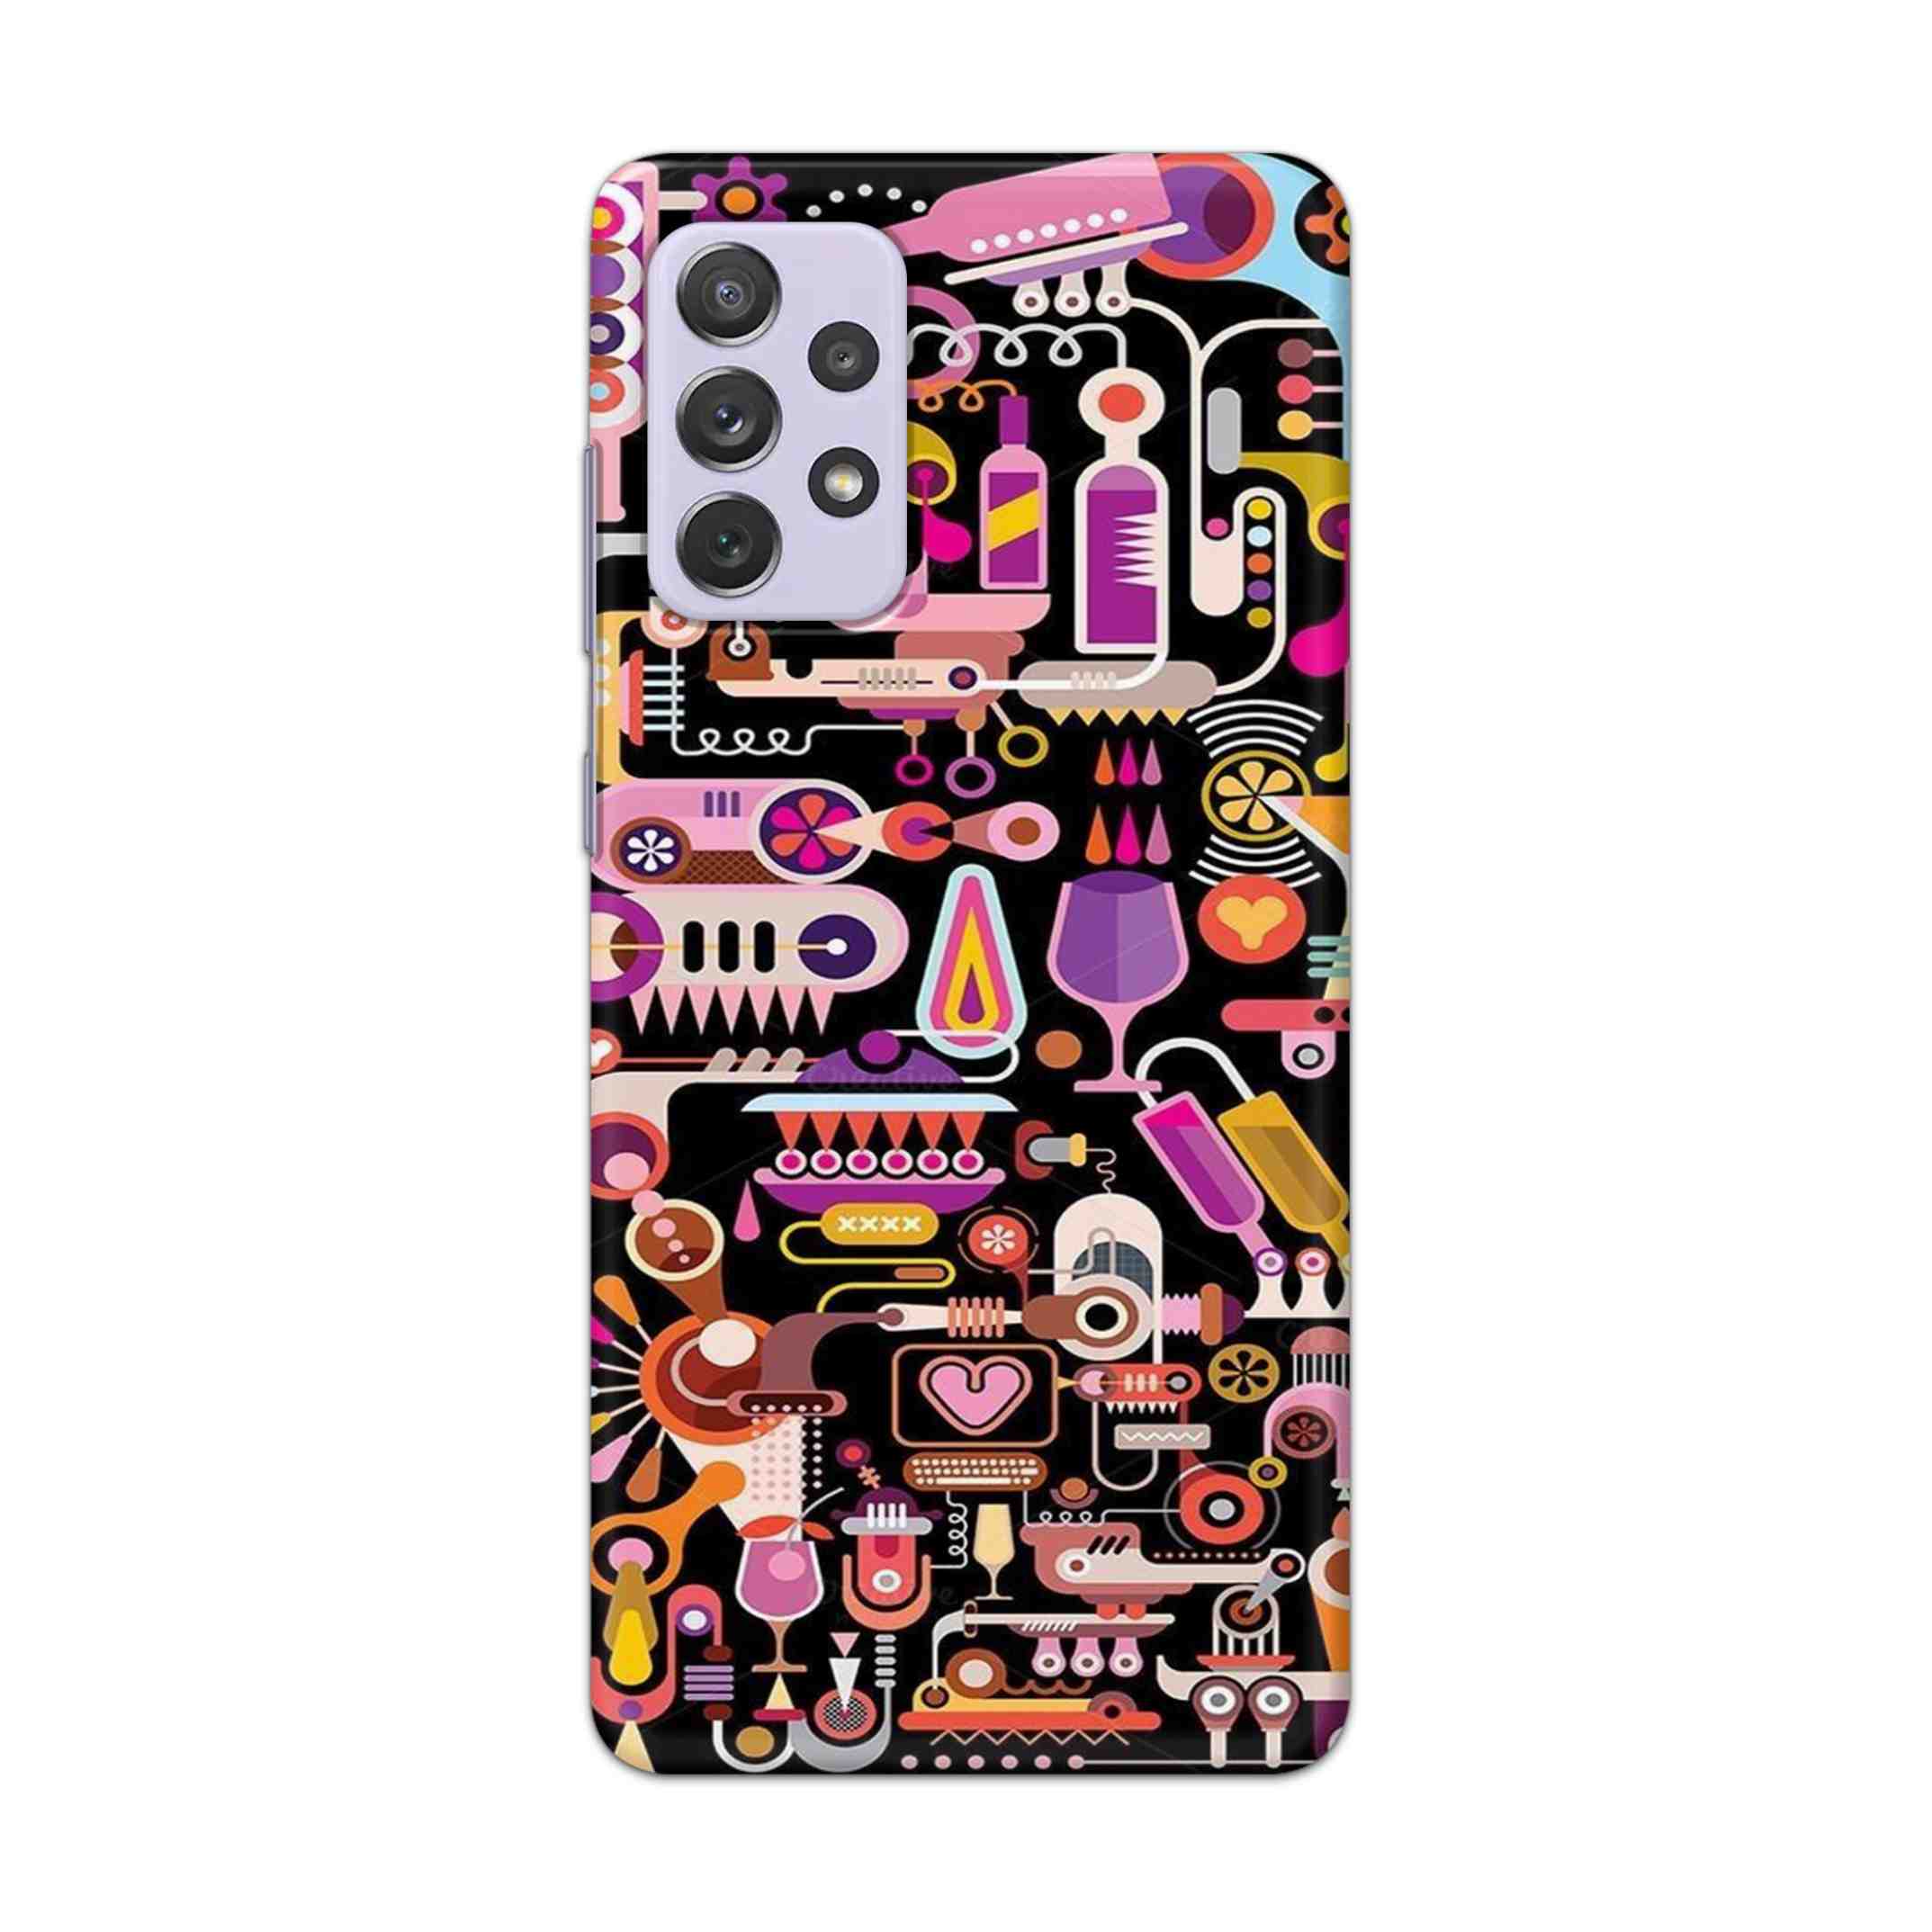 Buy Lab Art Hard Back Mobile Phone Case Cover For Samsung Galaxy A72 Online